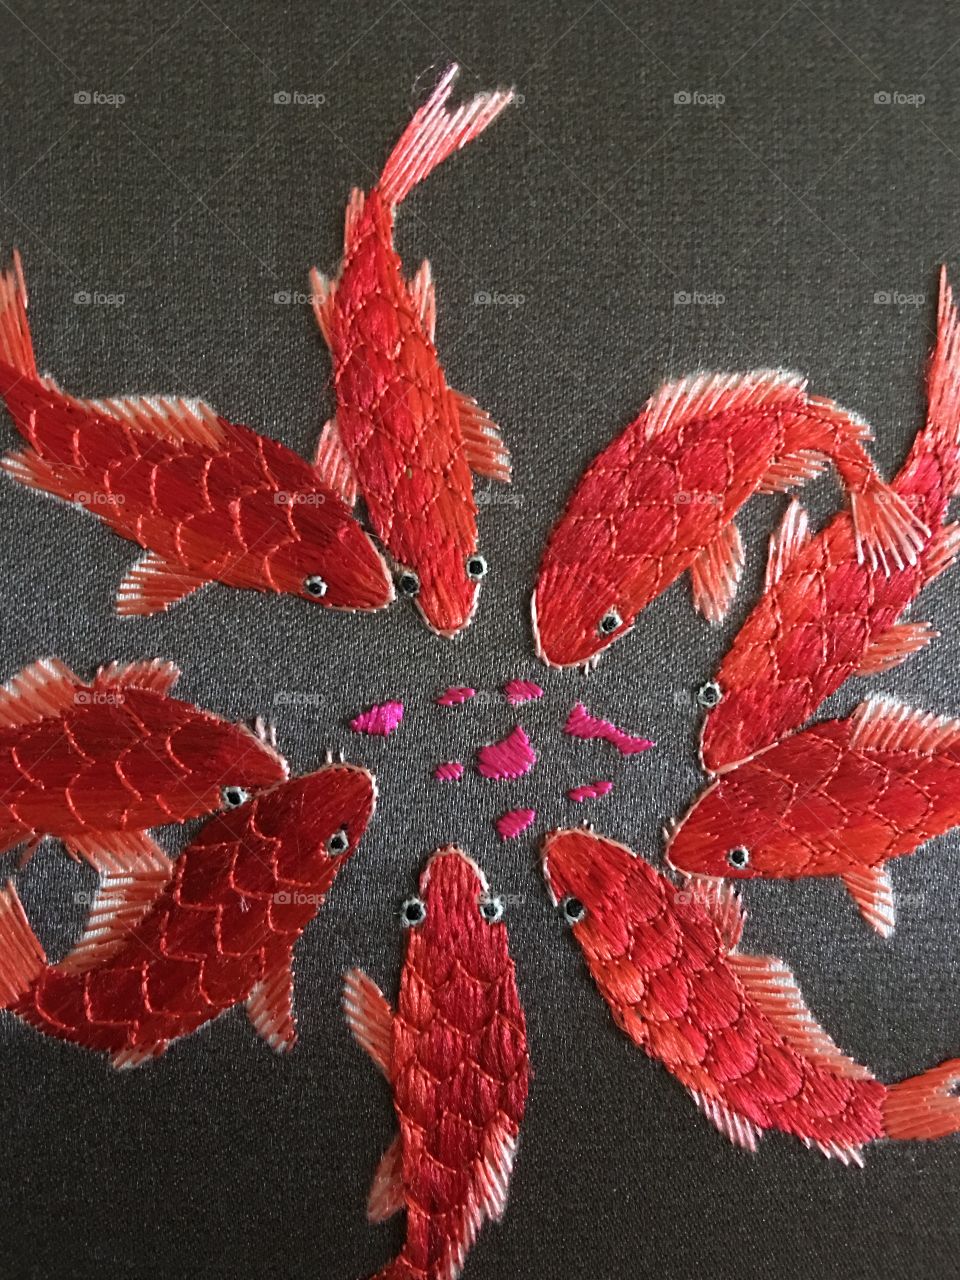 Closer view embroidered carp